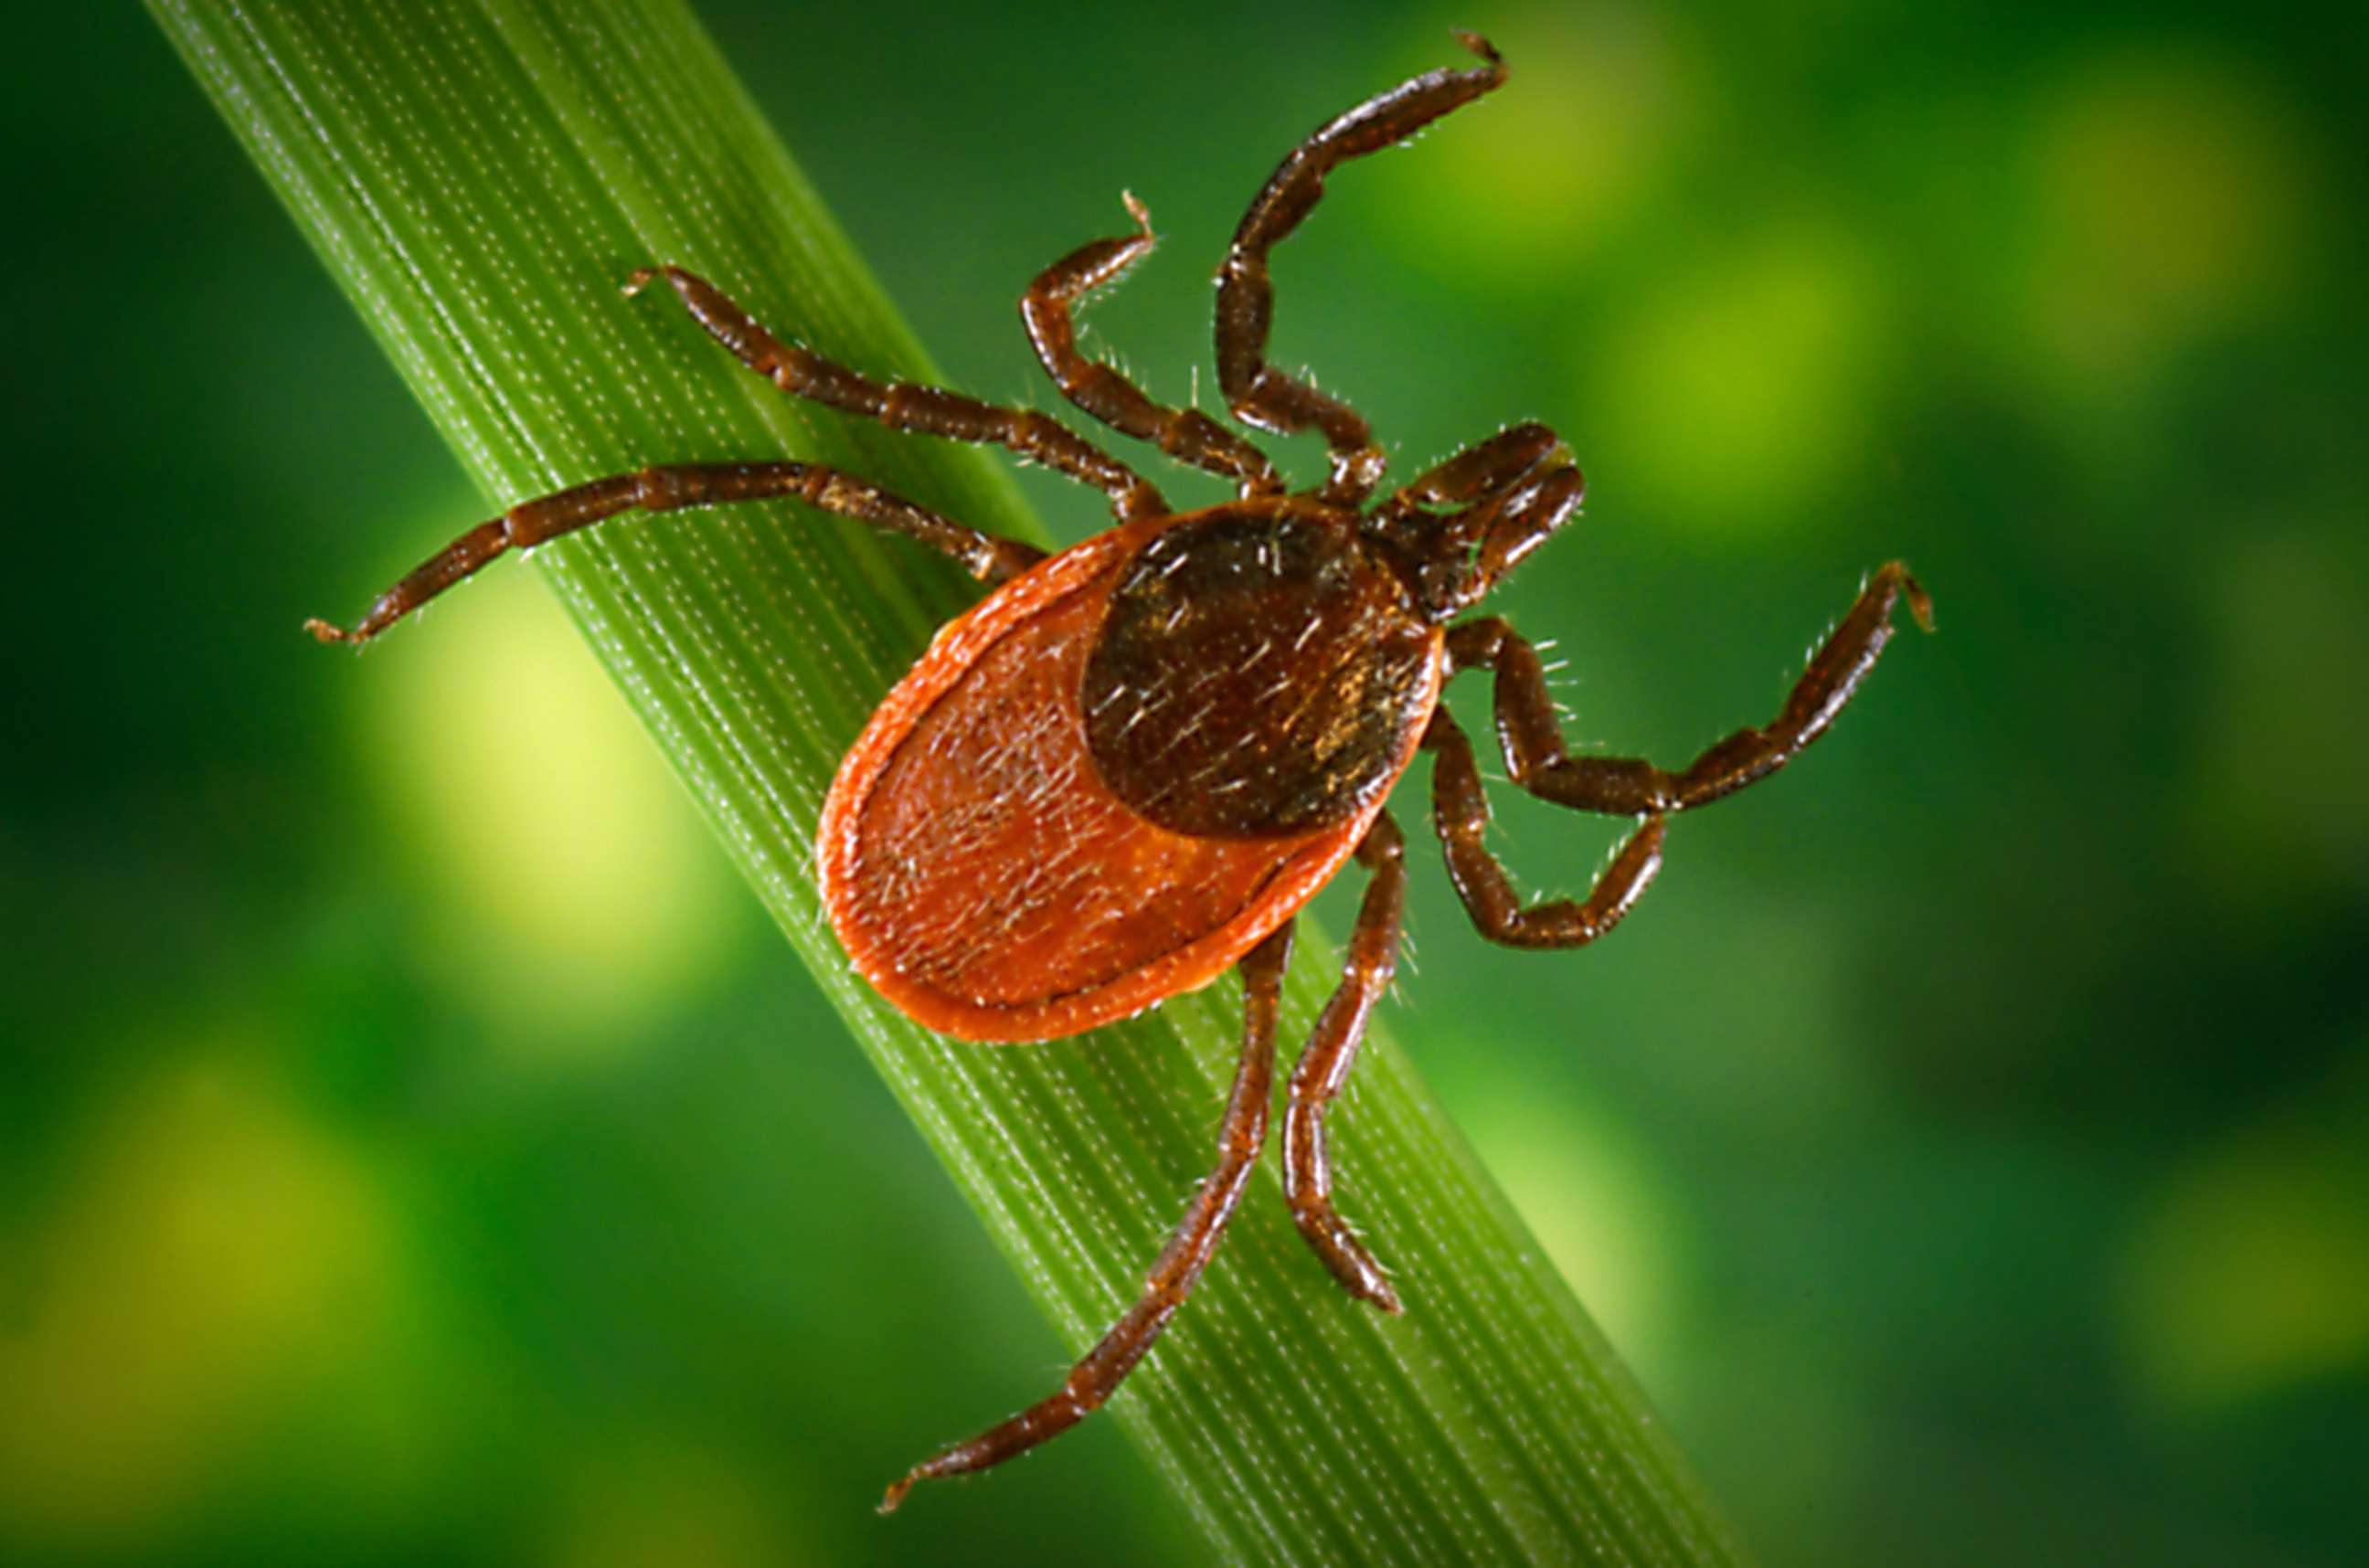 PHOTO: Blacklegged tick, Ixodes pacificus, on a leaf, is a carrier of Lyme disease.